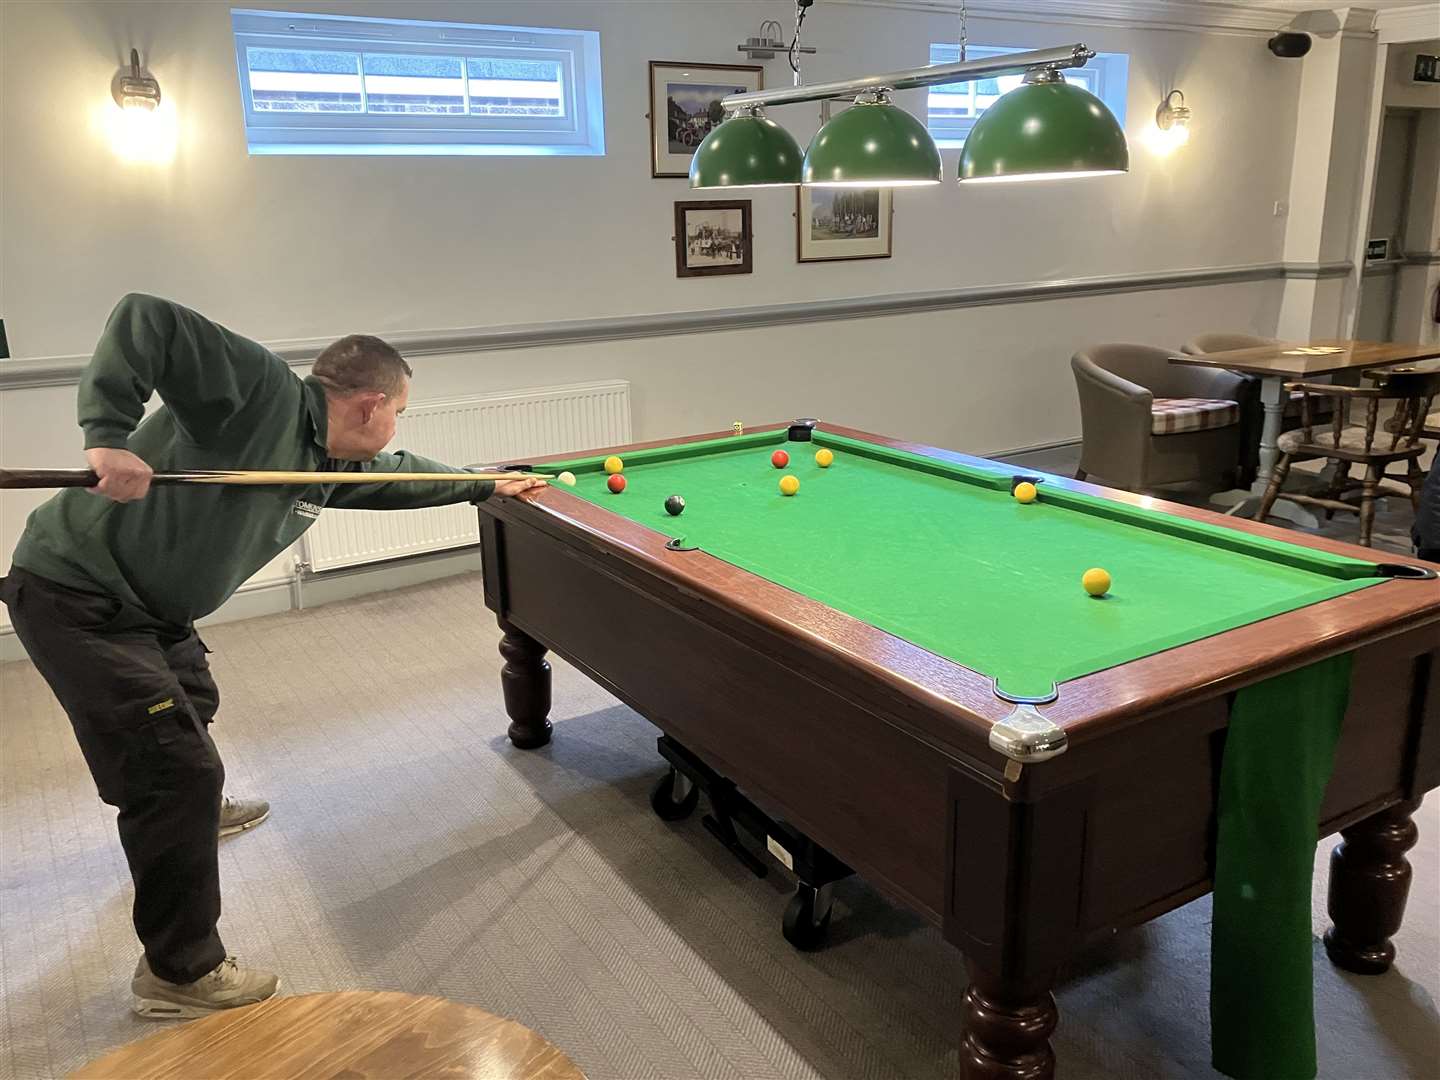 The pints are great, but some of the shots are questionable at Marden Village Club